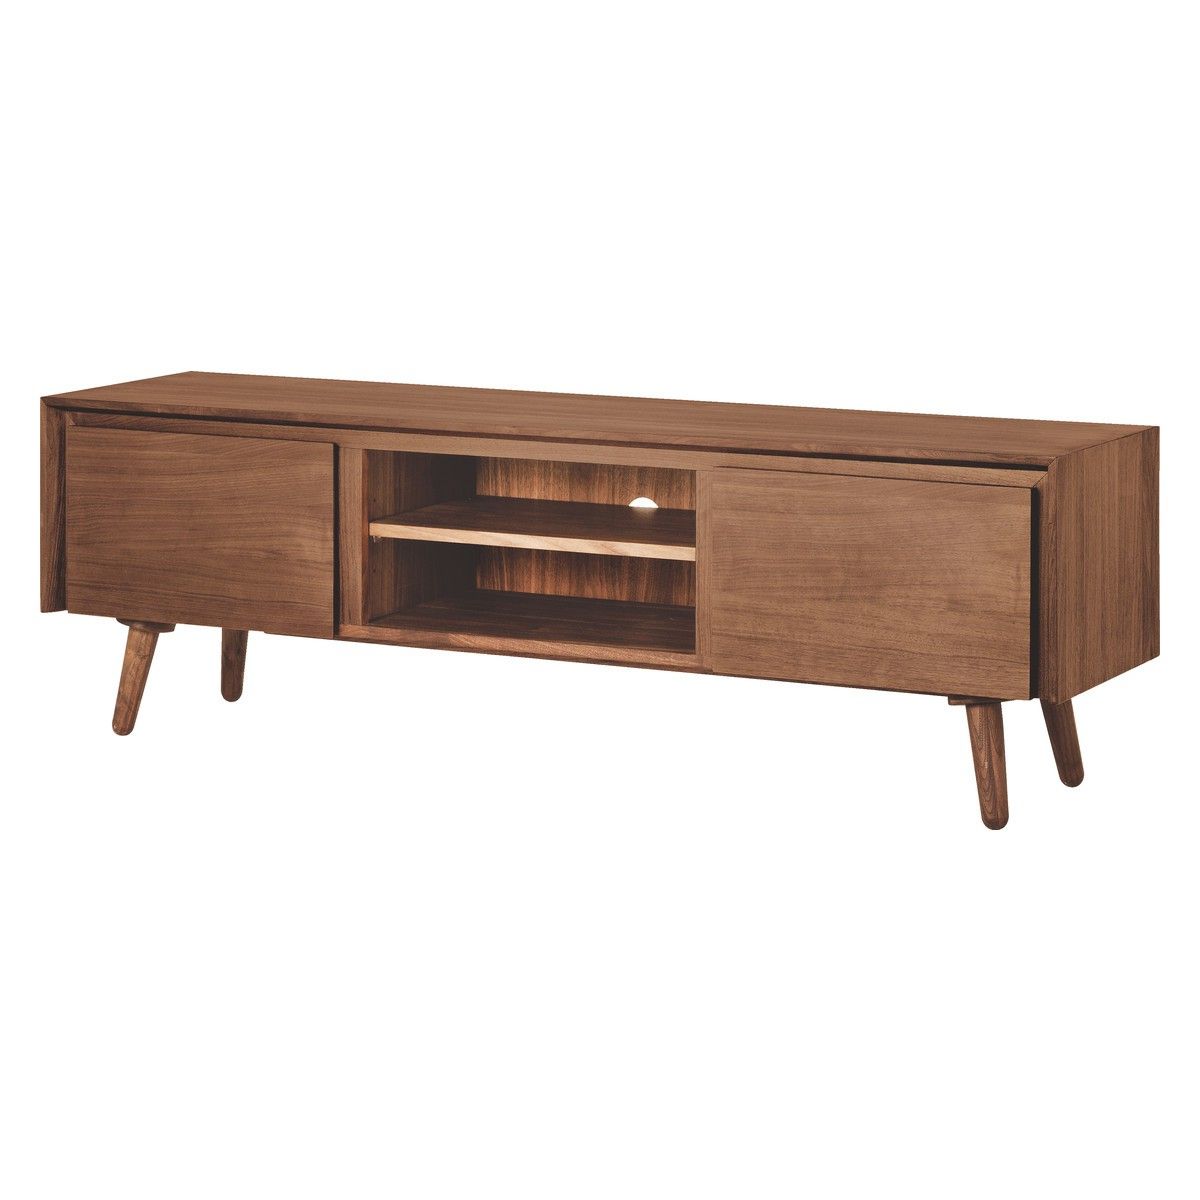 Buy Now At Habitat Uk Within Walnut Tv Cabinets (View 3 of 20)